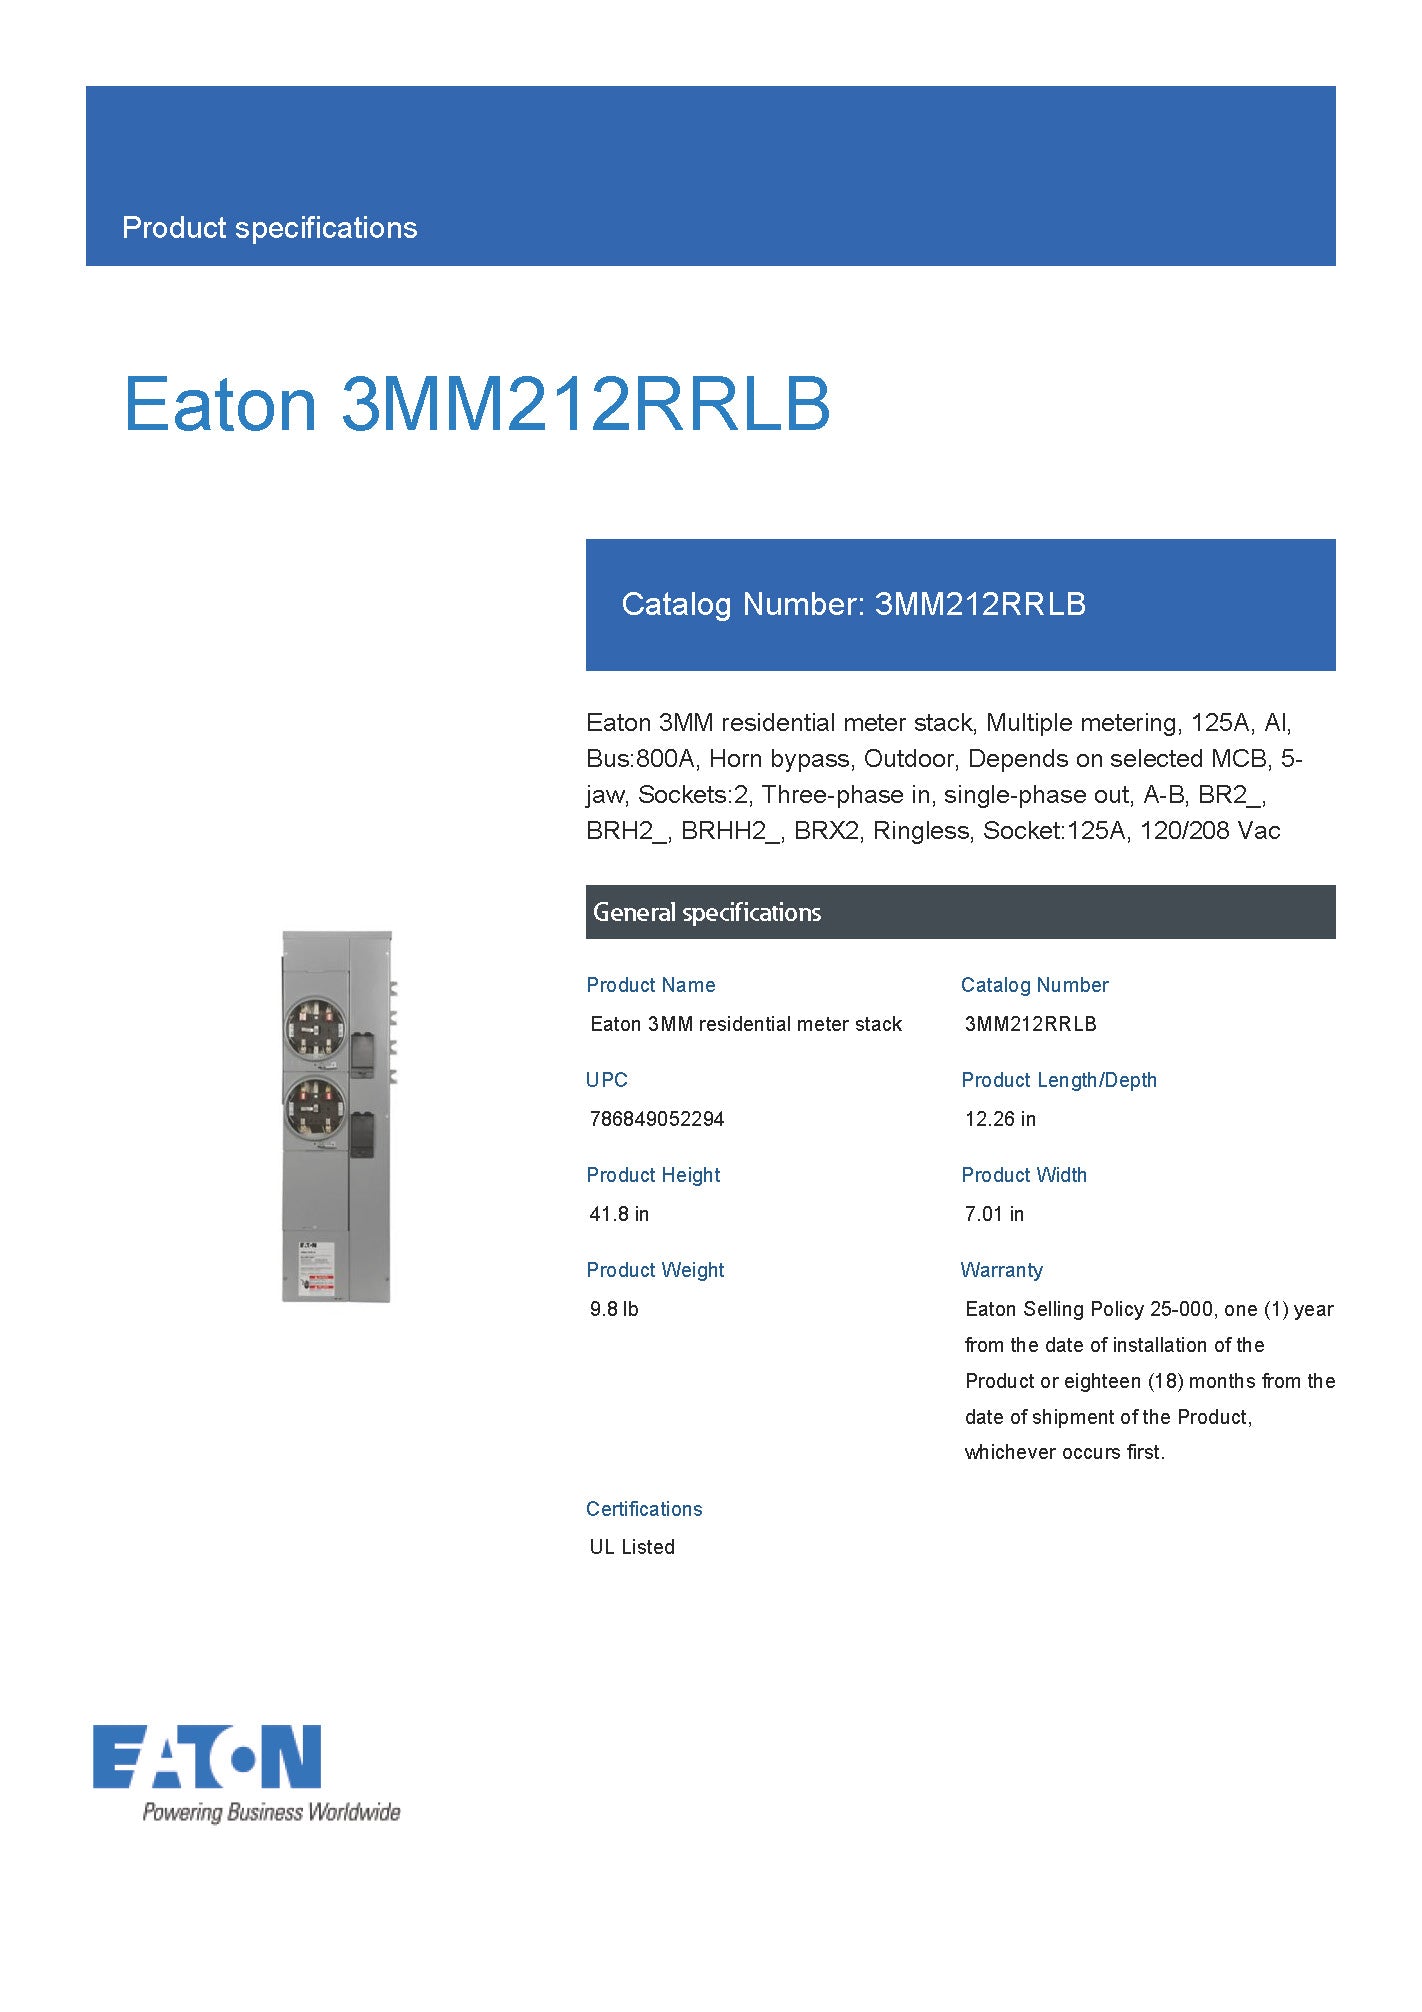 Eaton 3MM212RRLB 3PH In / Single Phase Out 2 Gang 125A Socket Ringless Horn Bypass Meter Stack